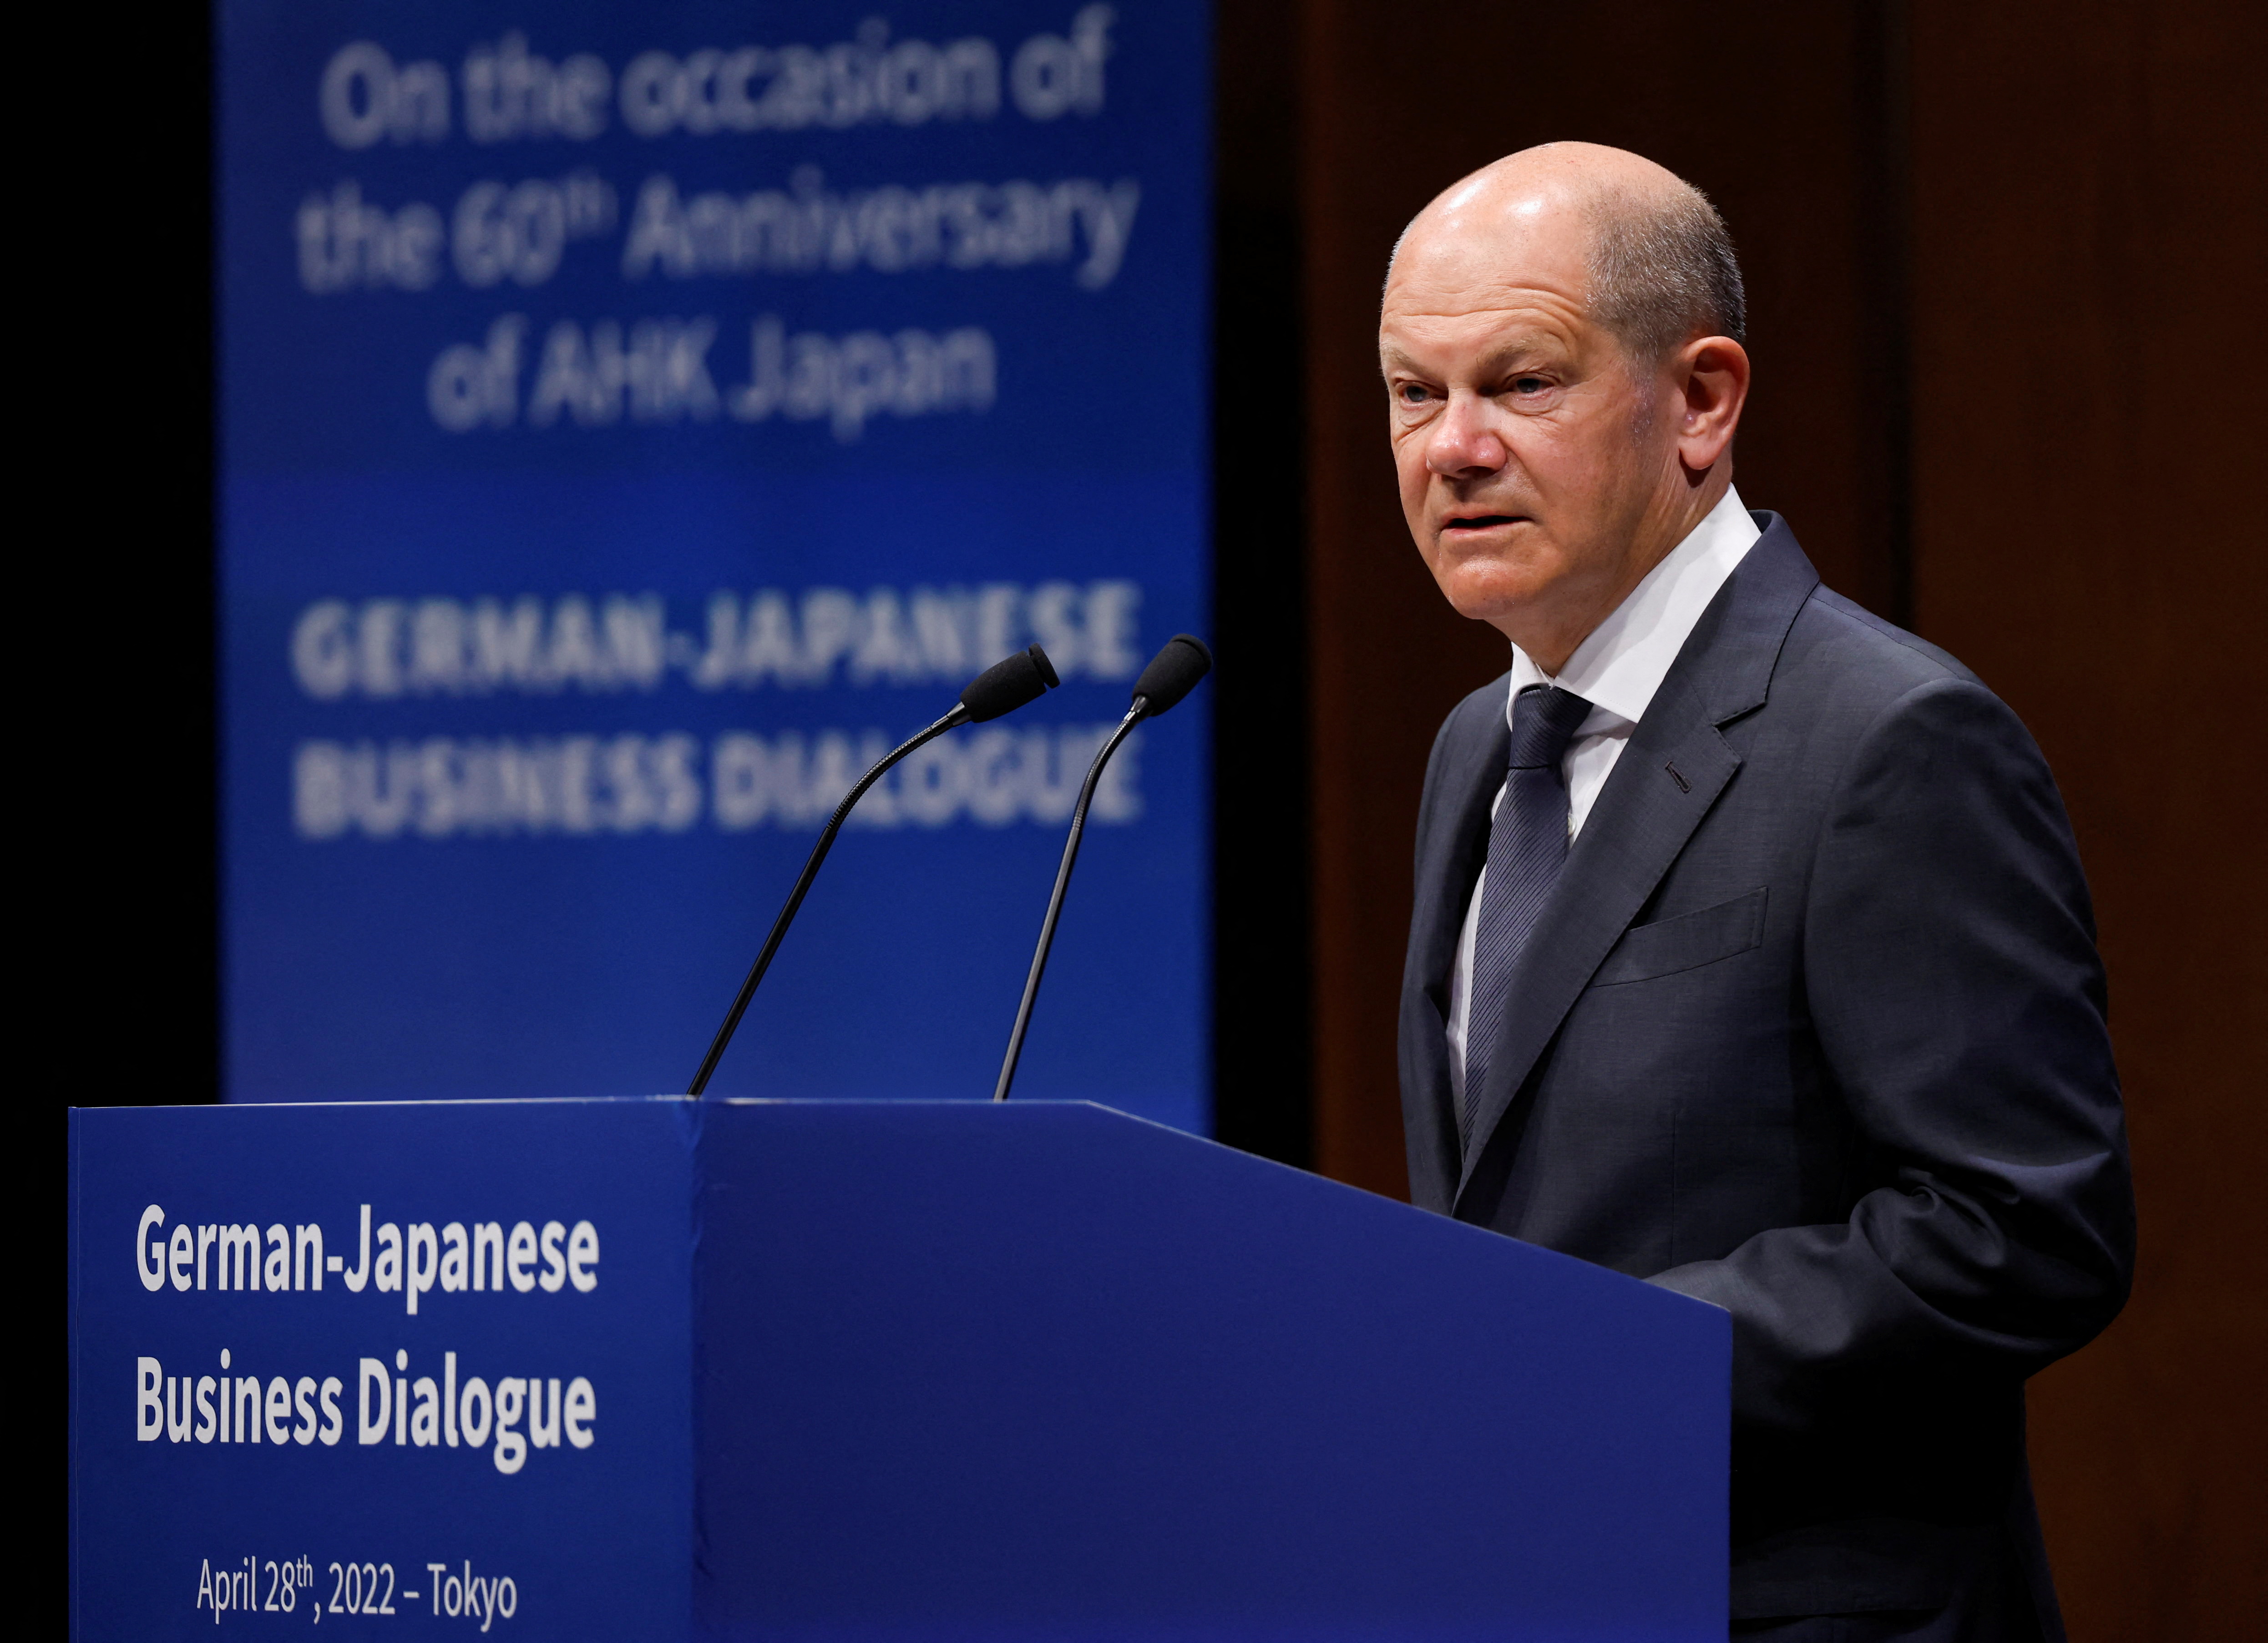 Germany-Japan Business Dialogue in Tokyo